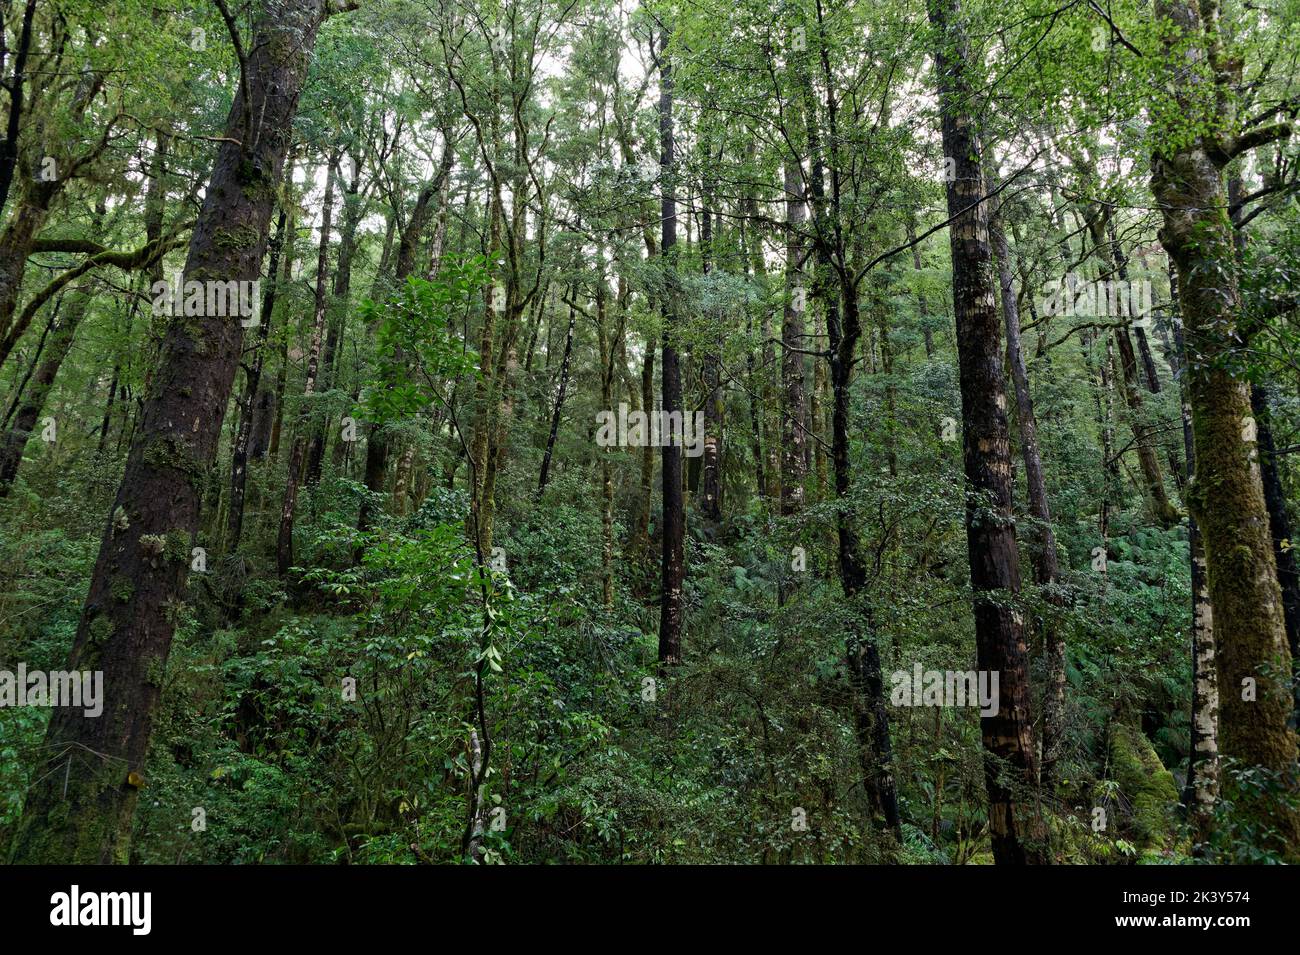 A stand of native trees, probably regrowth as their trunks are quite narrow. Stock Photo